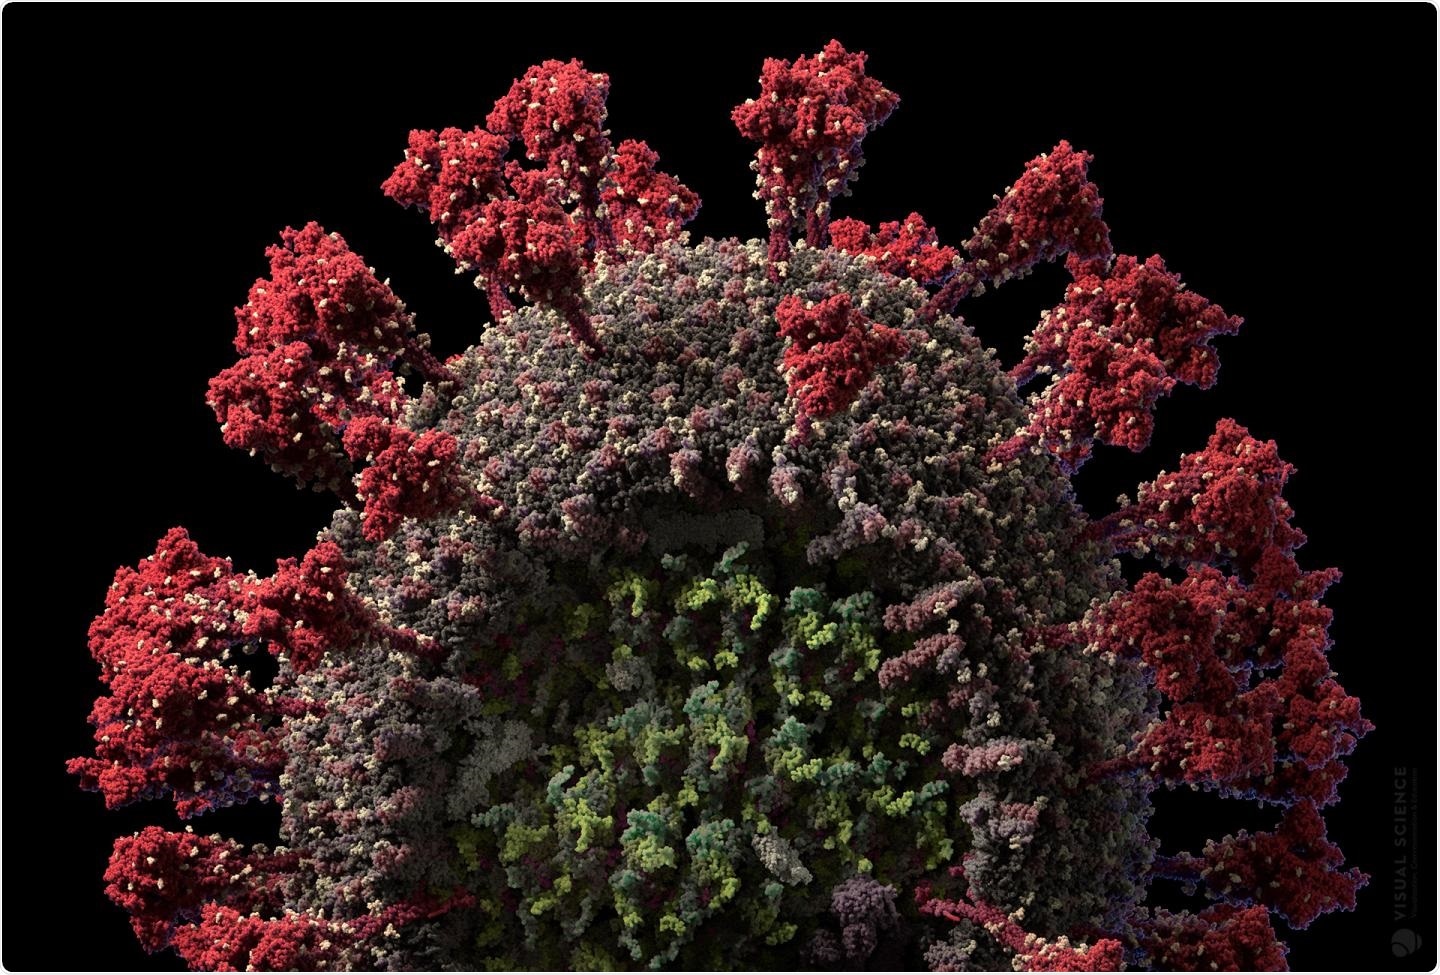 A scientifically accurate model of the SARS-CoV-2 virus. Image Credit: Visual Science